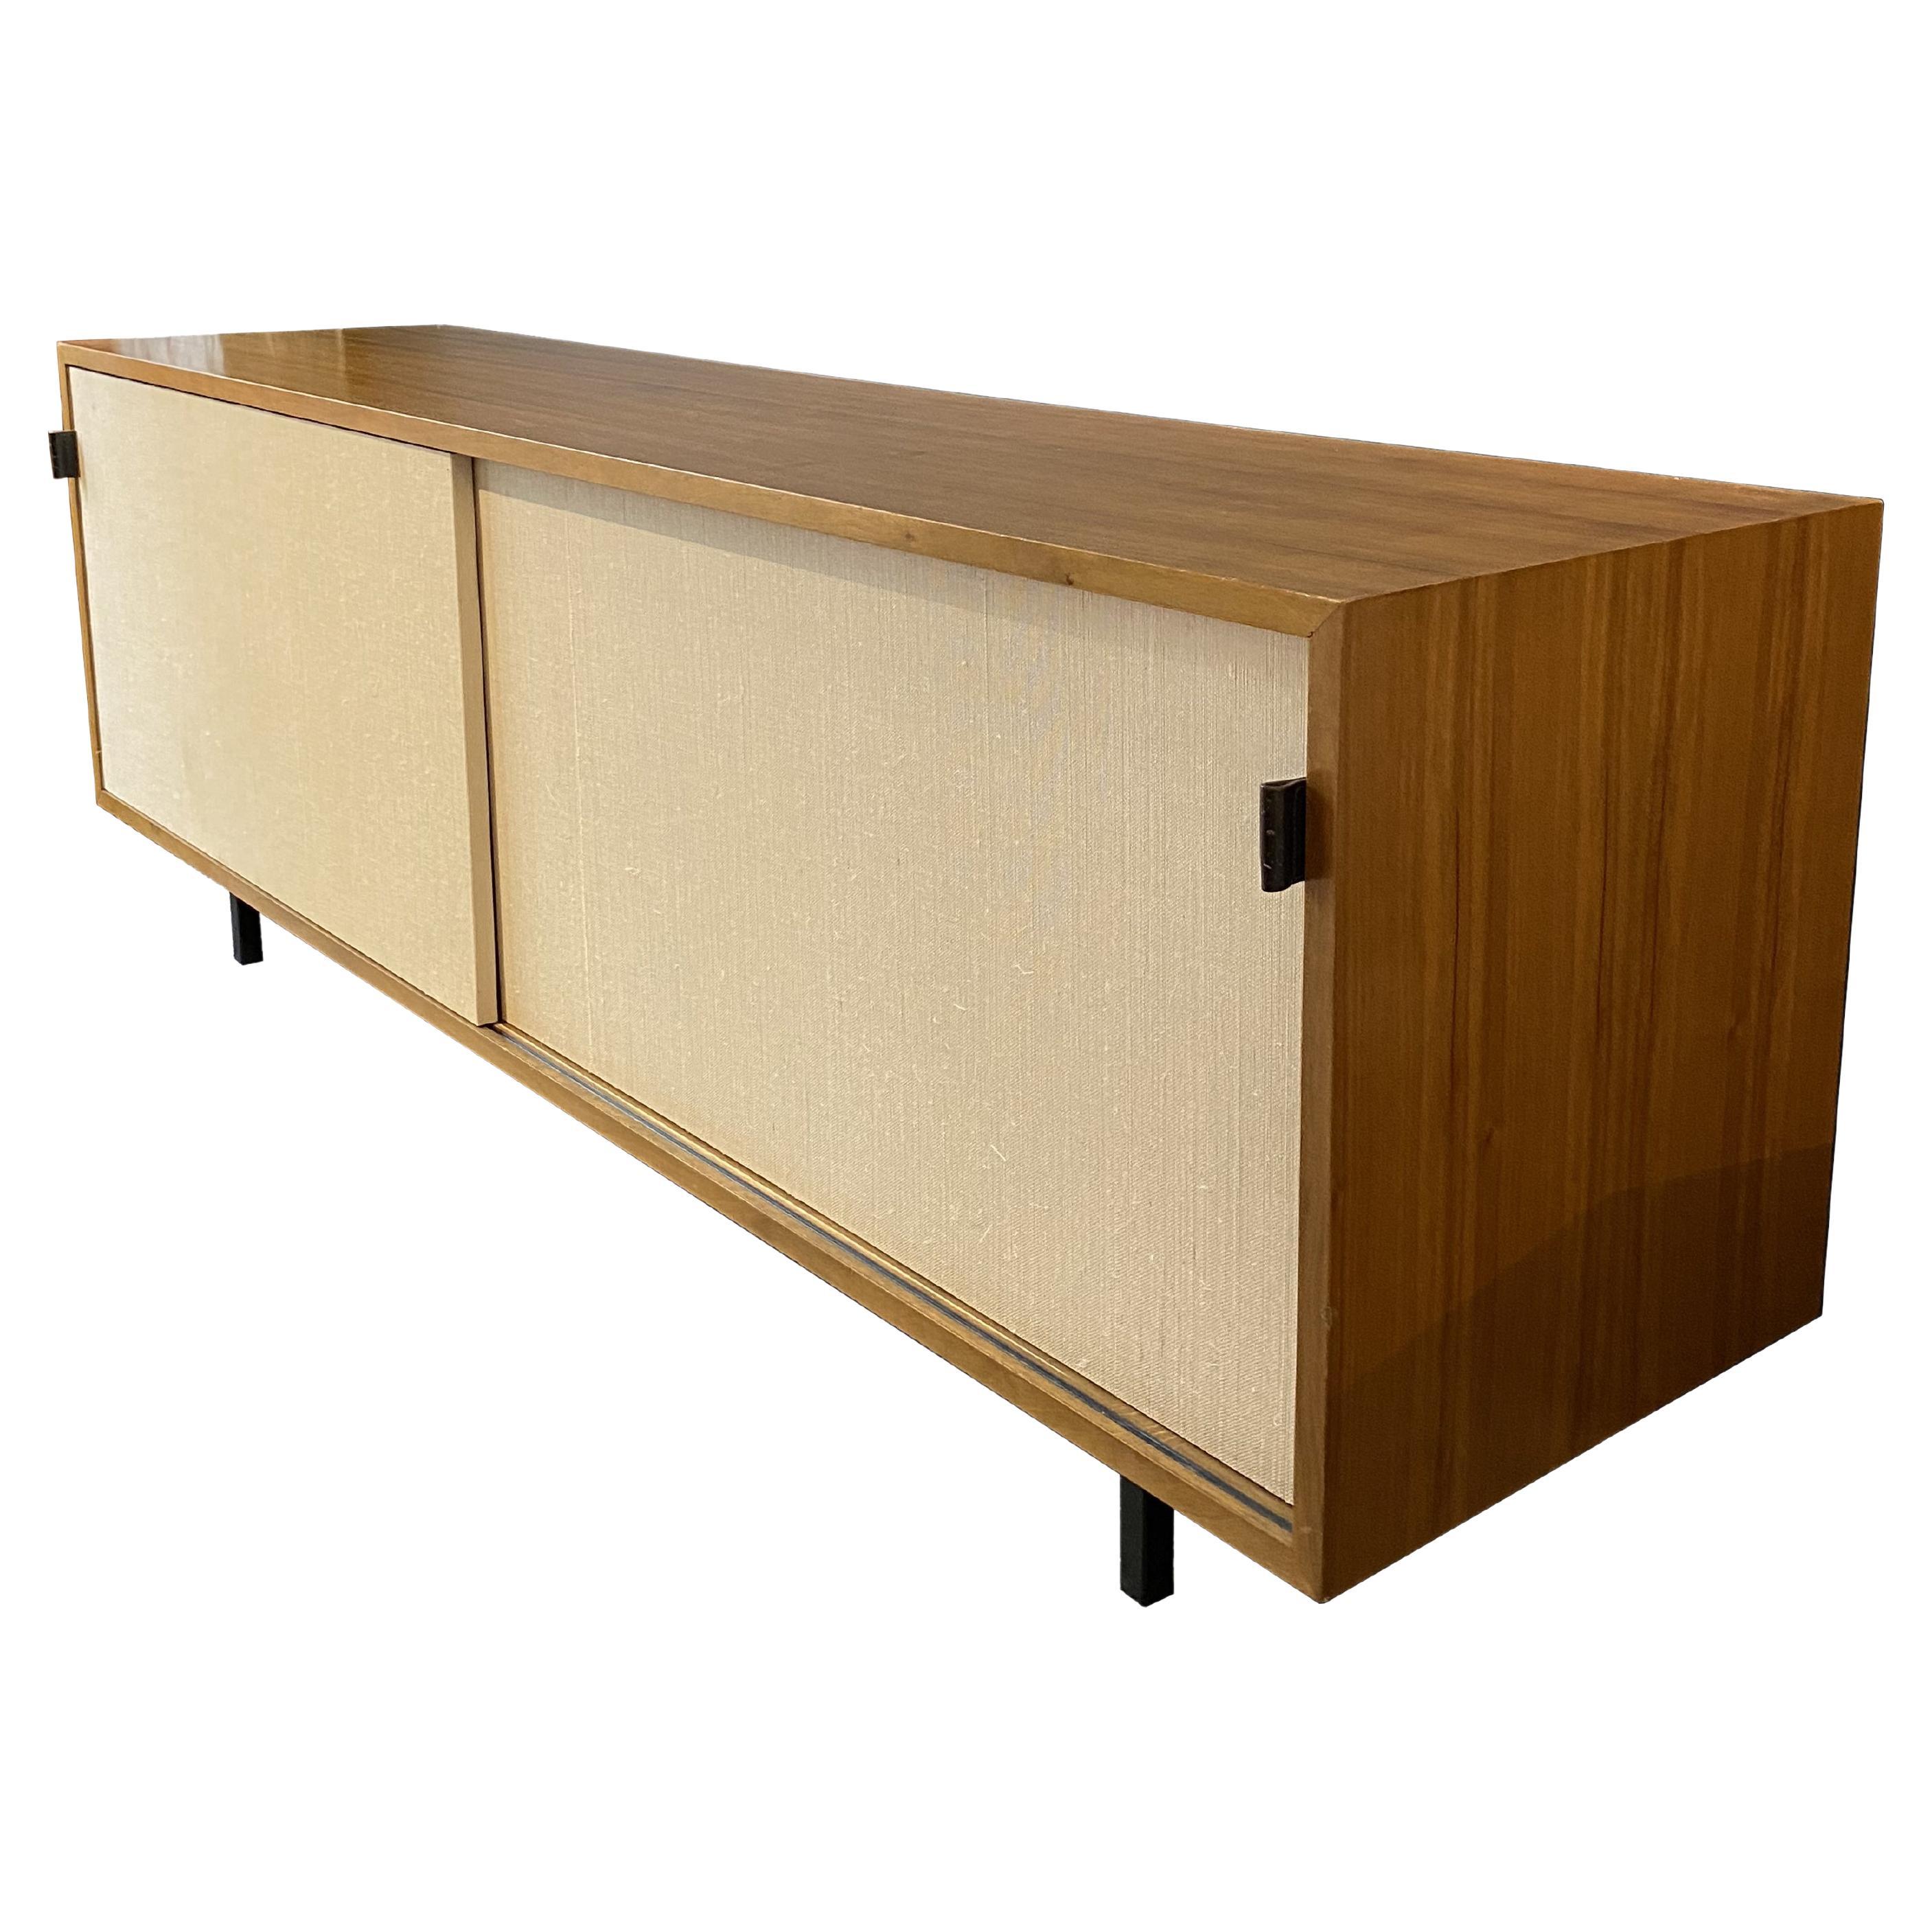 Florence Knoll Sideboard Made in Switzerland by Wohnbedarf for Knoll Int. 1